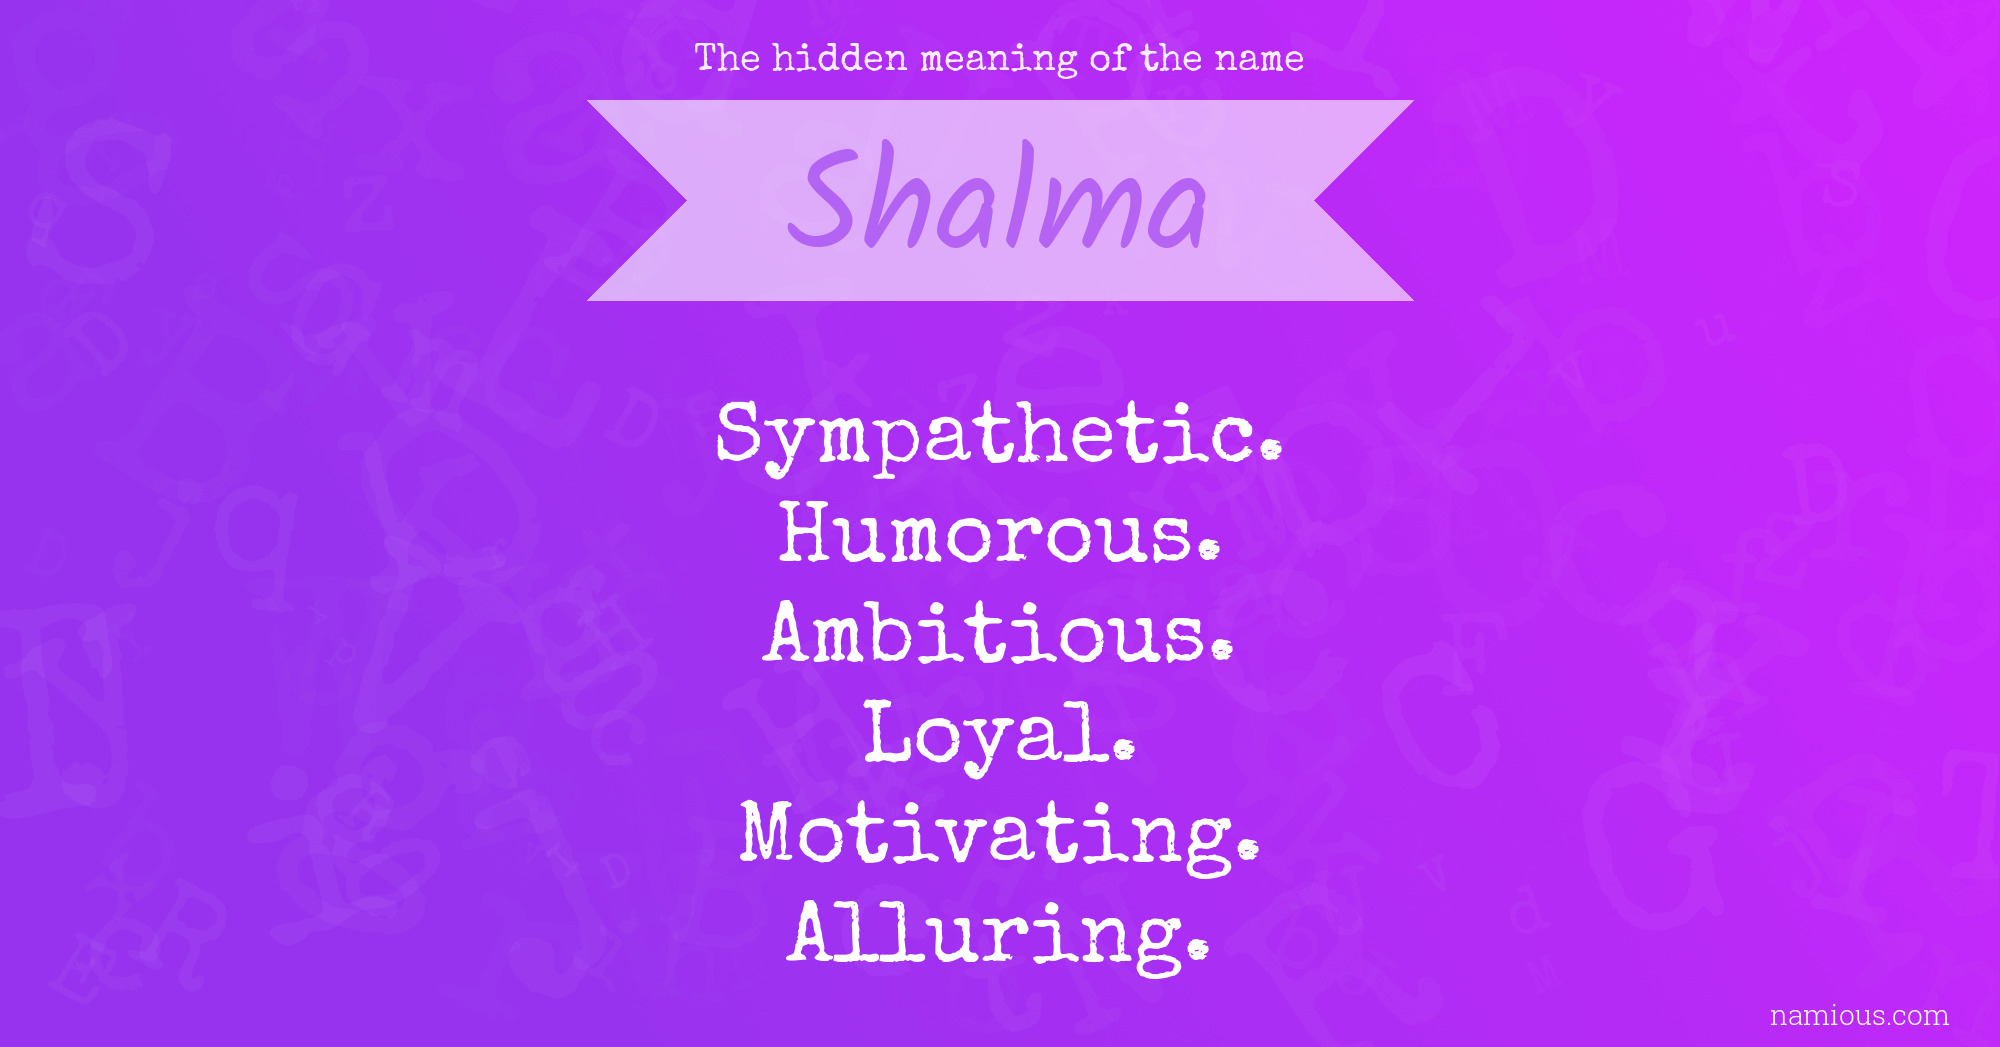 The hidden meaning of the name Shalma